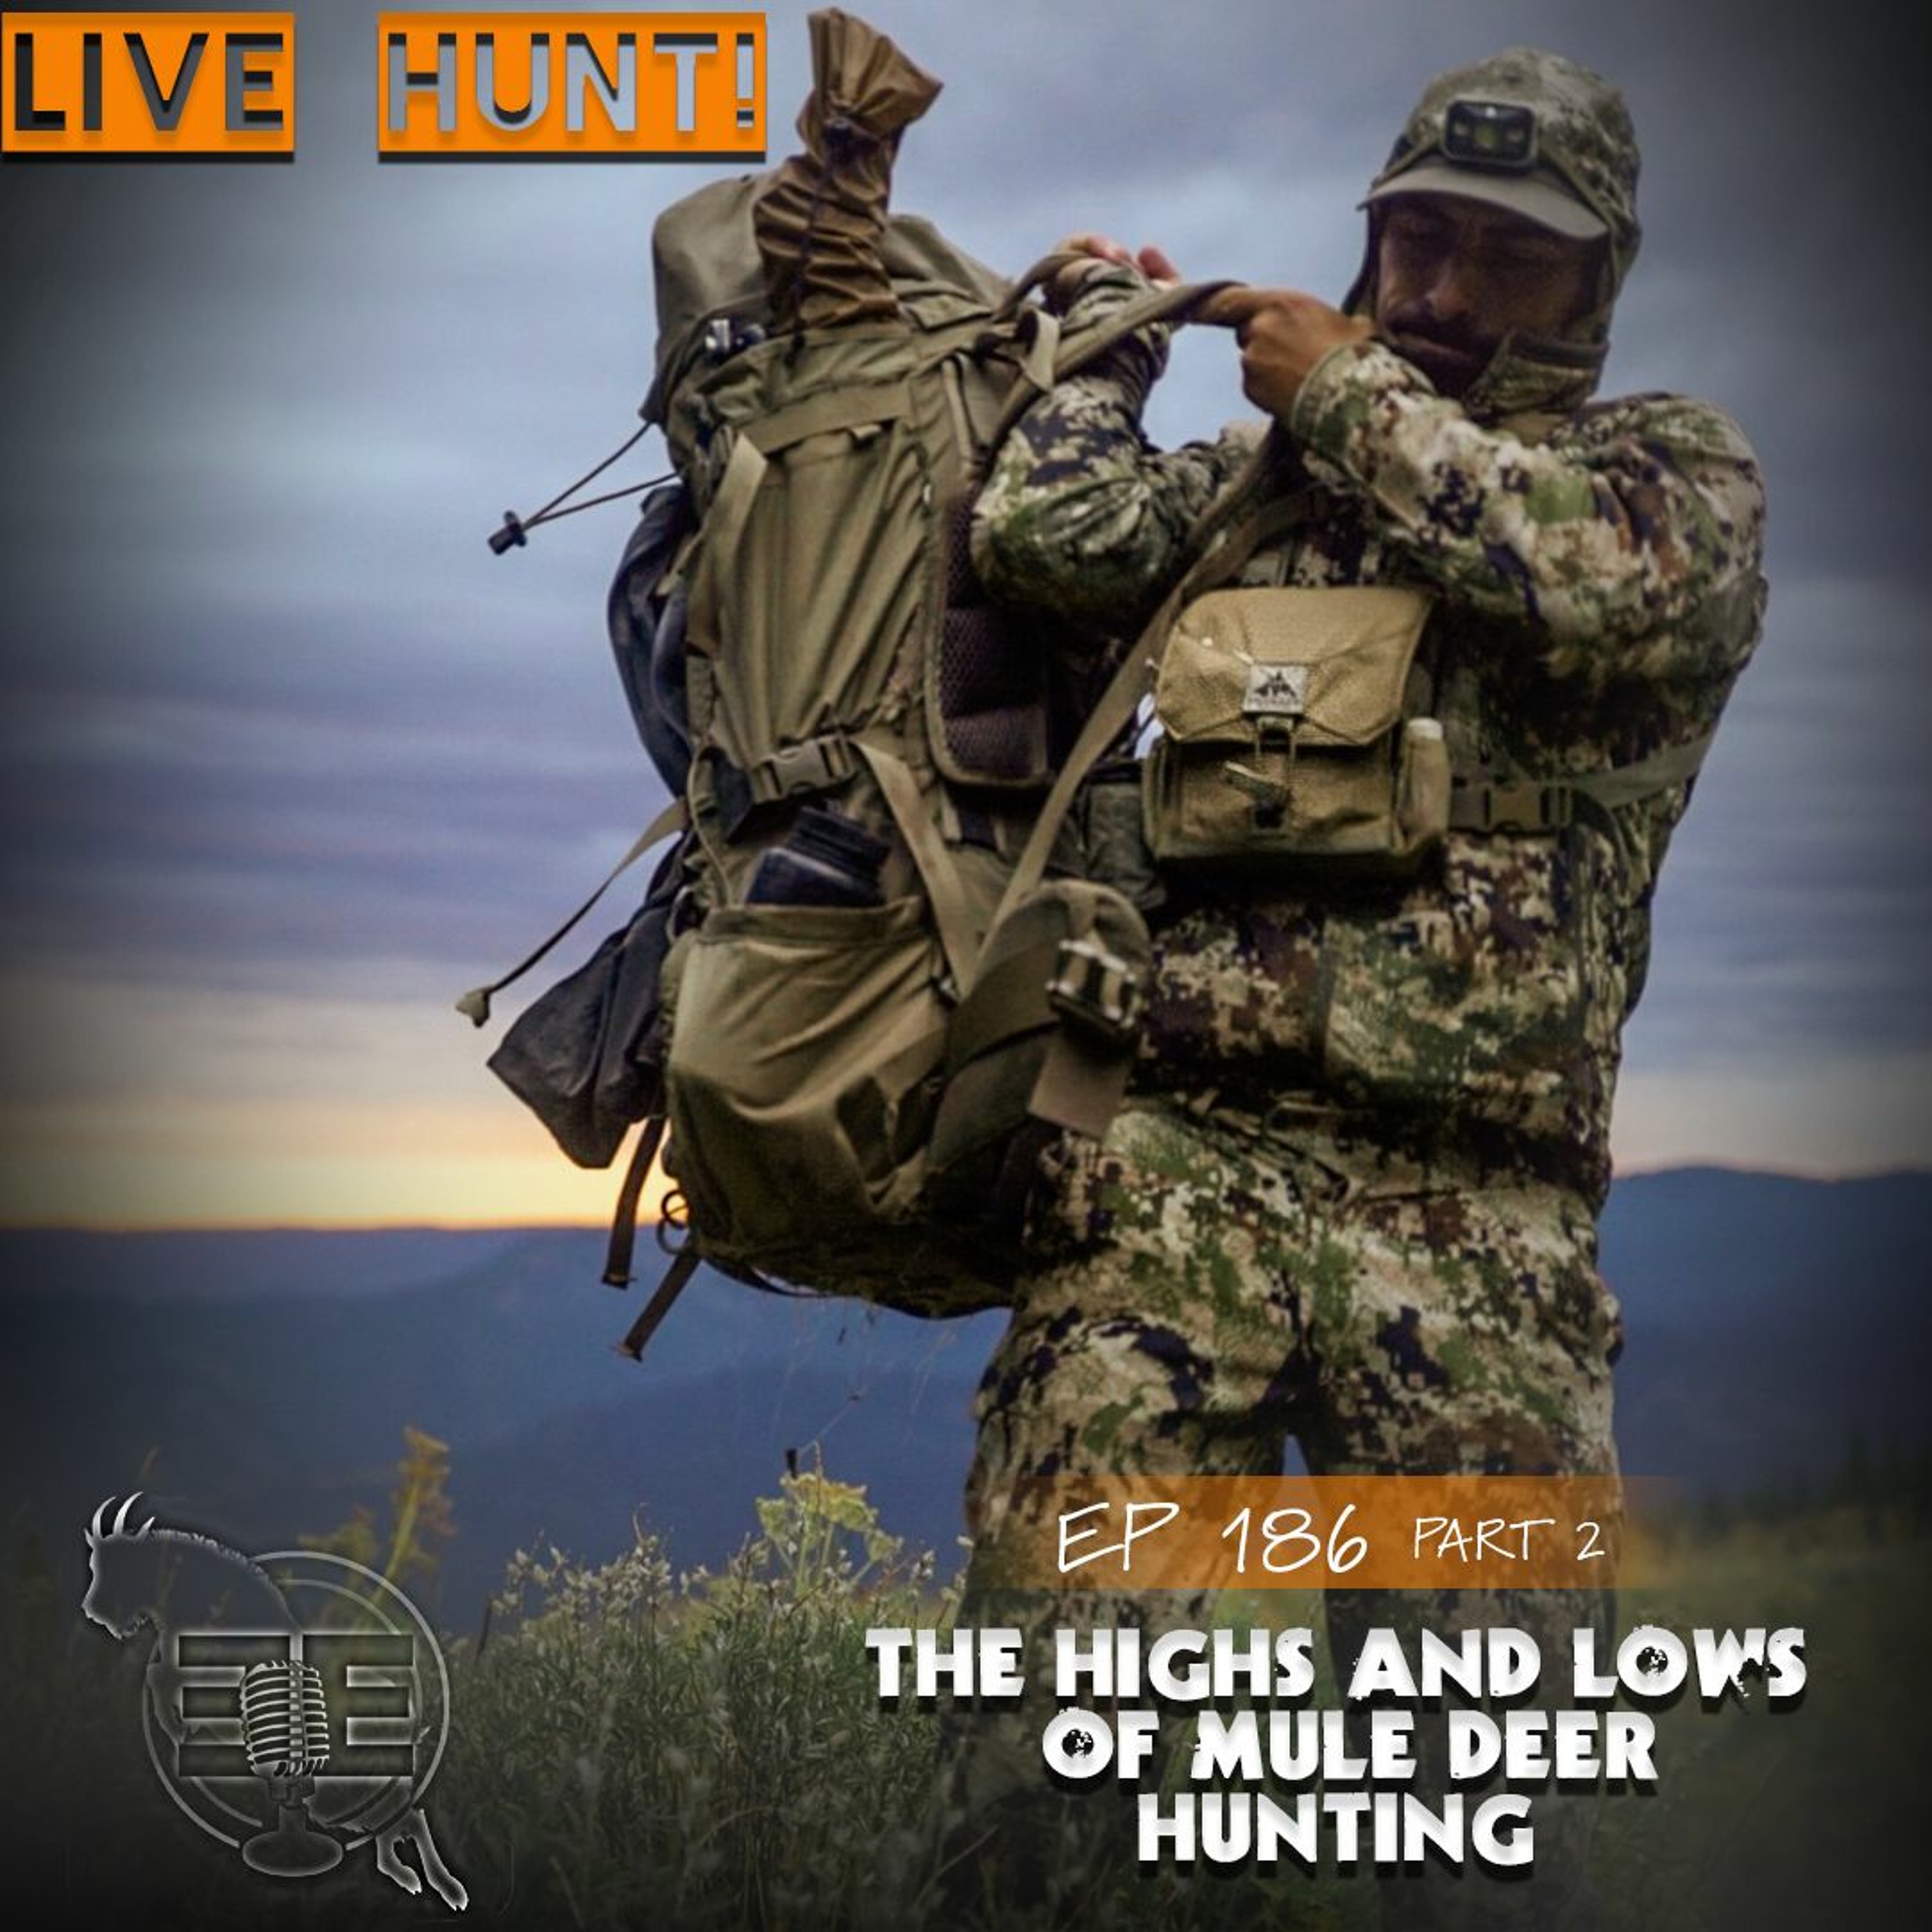 Episode 186: Live Hunt! The Highs and Lows of Mule Deer Hunting Part 2